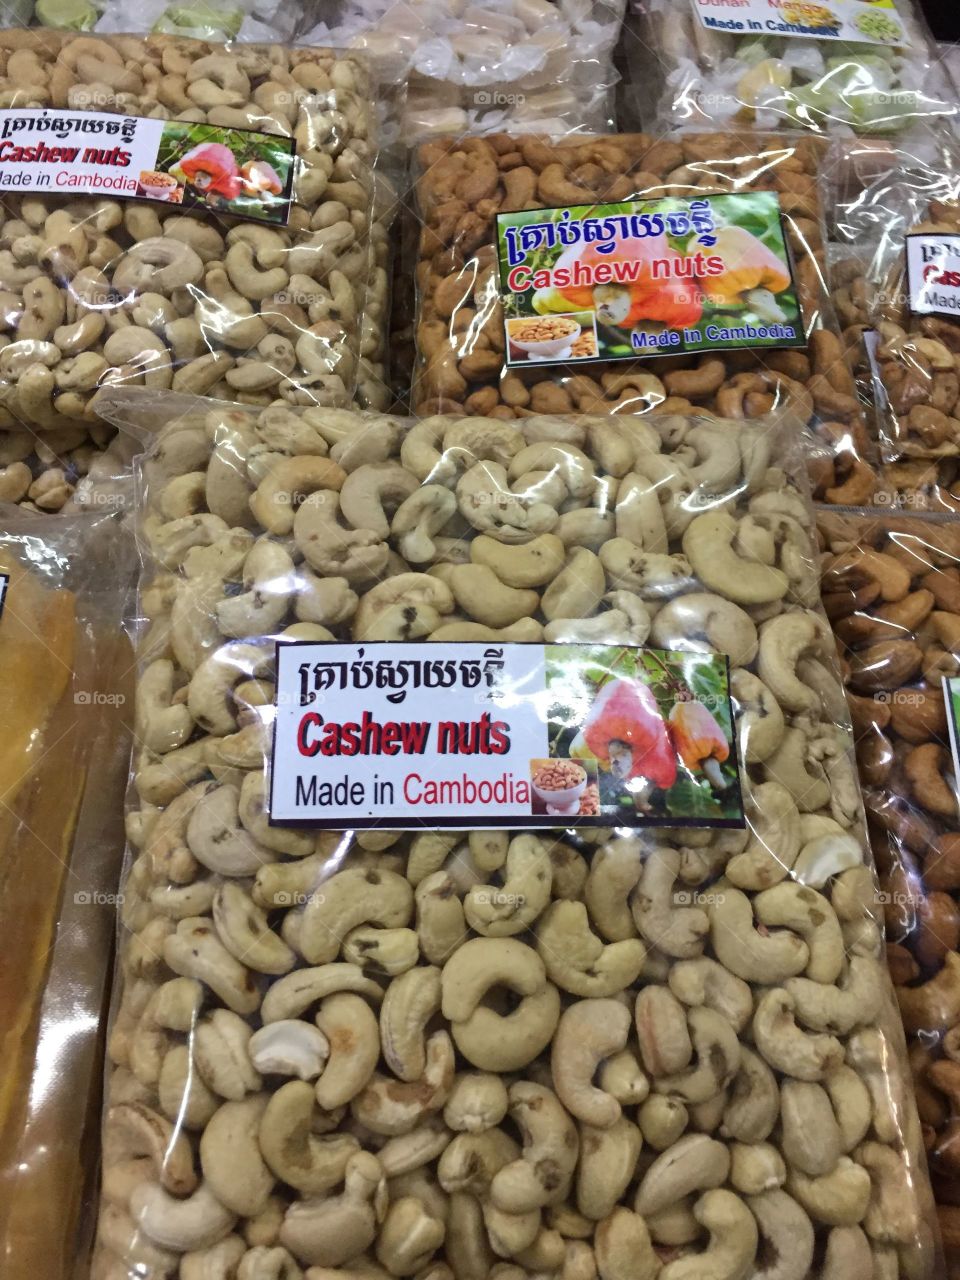 Nuts at A Marketplace in Cambodia April 2019.